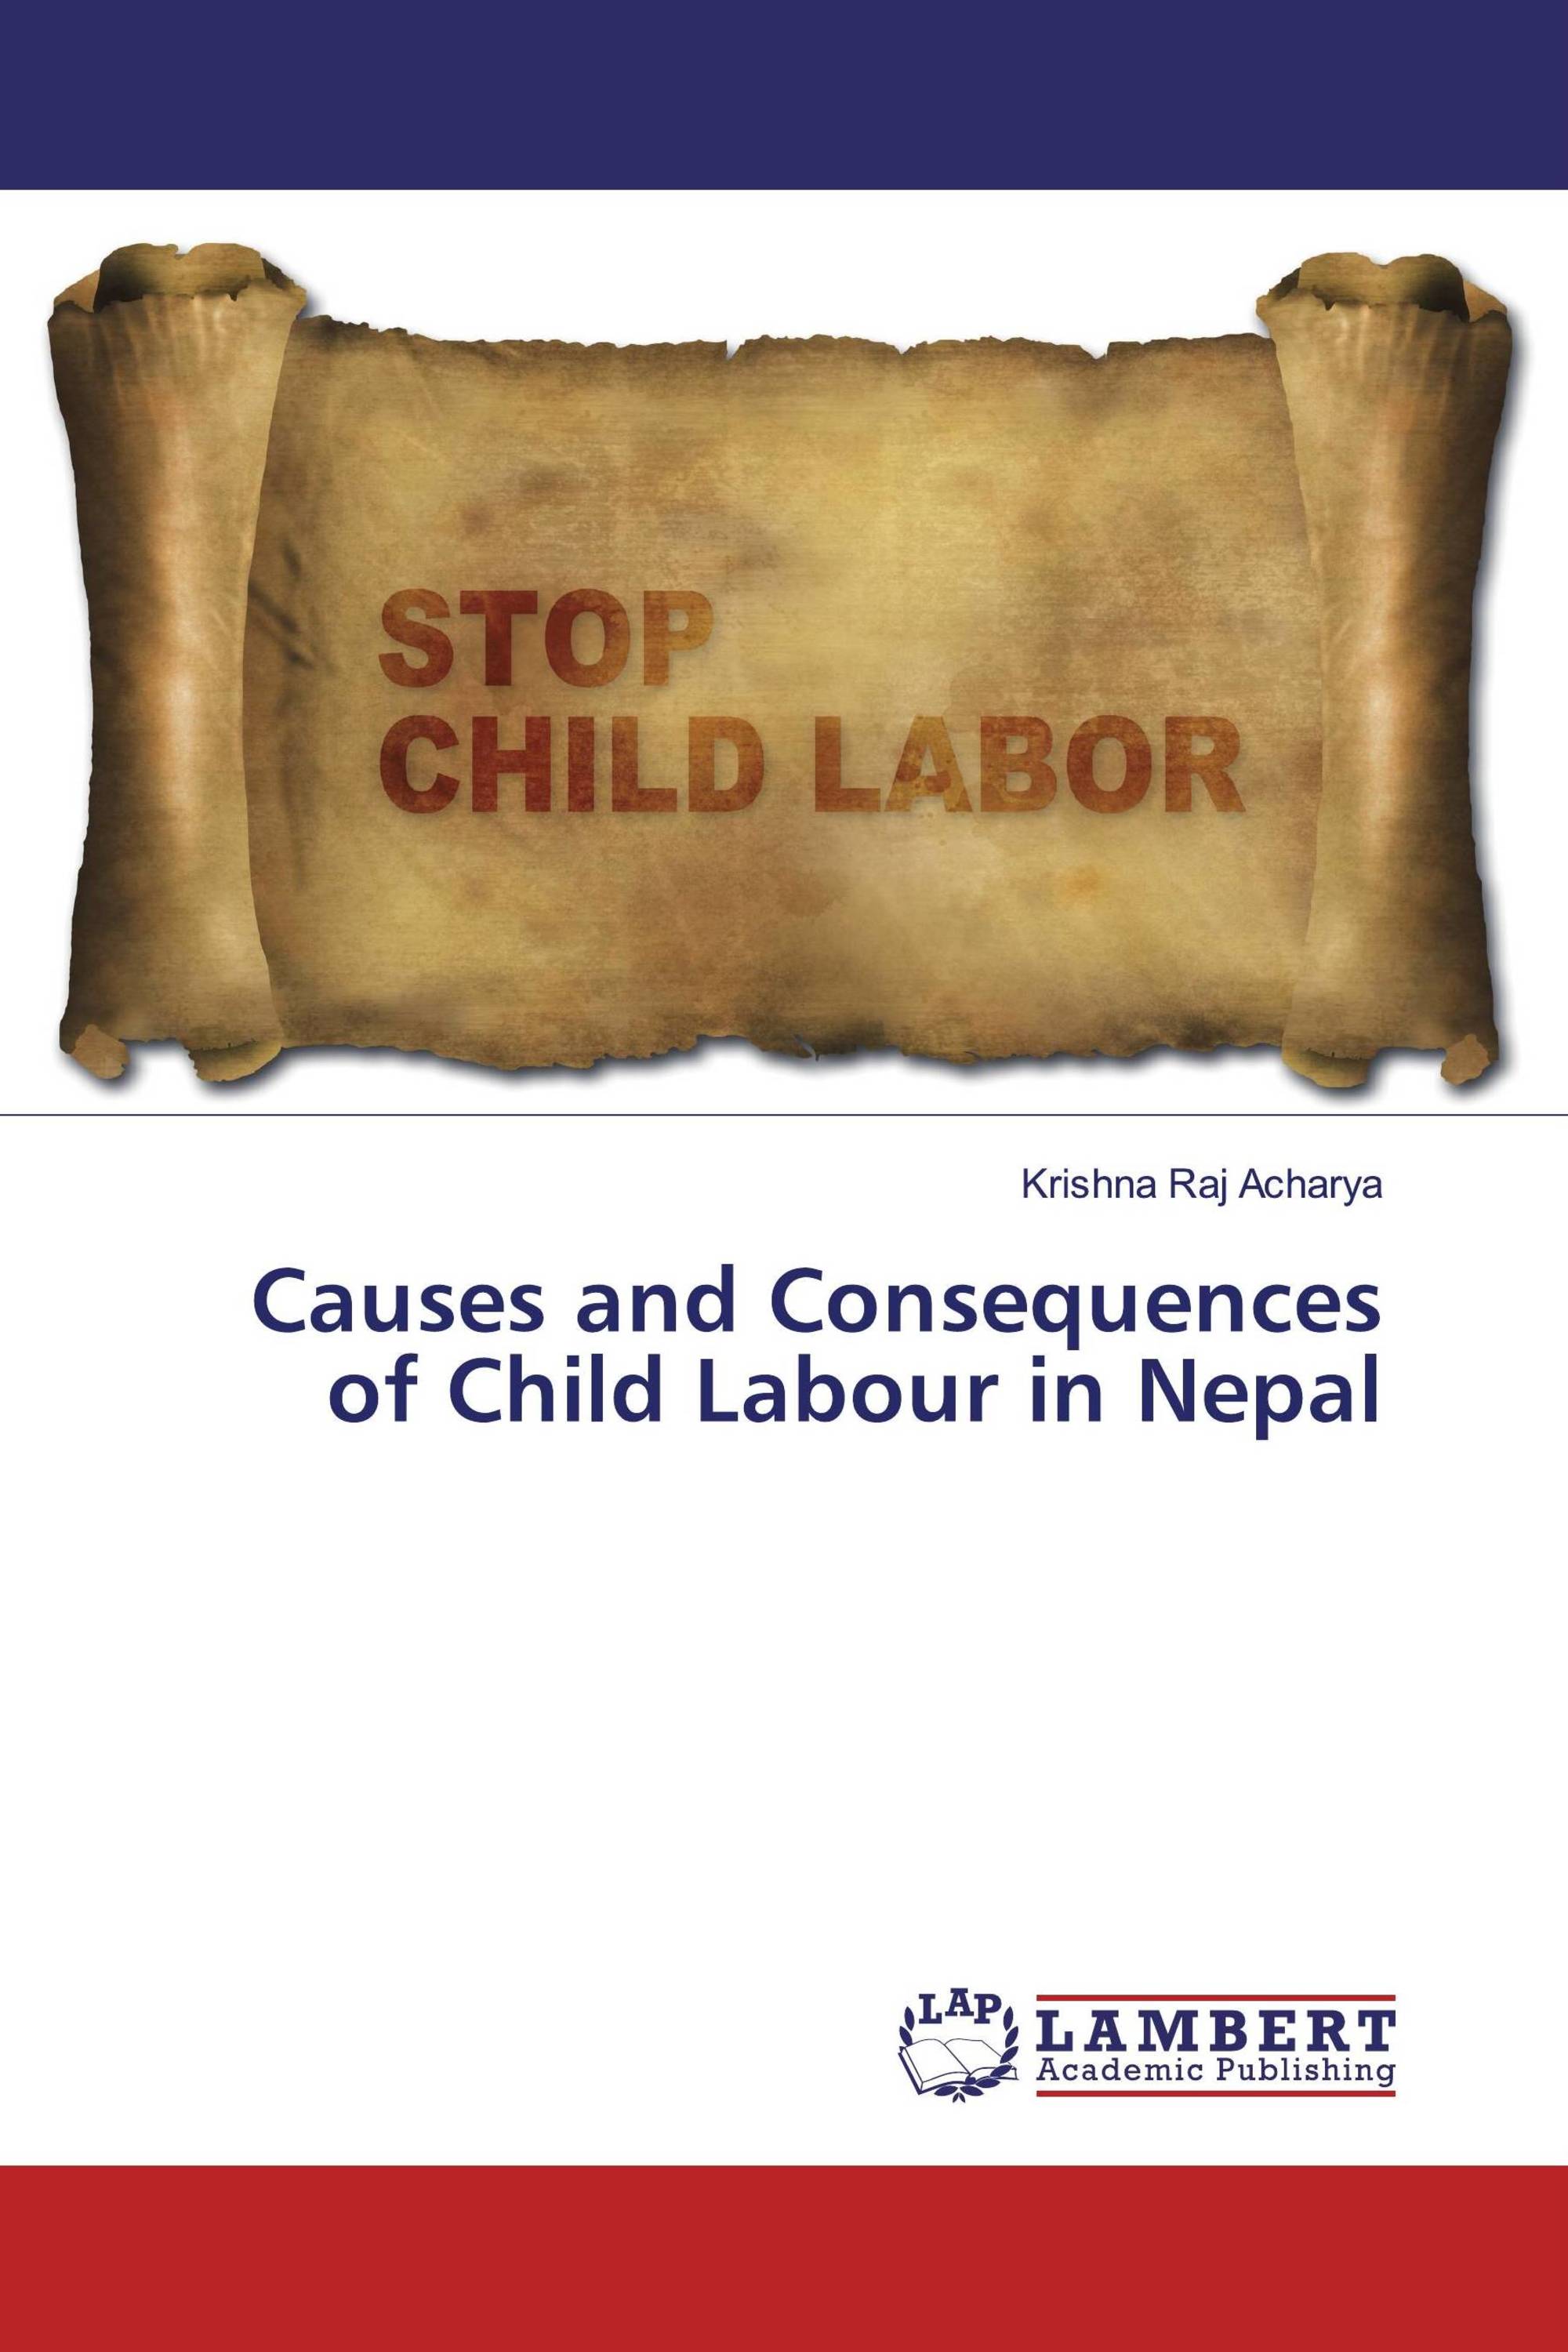 thesis on child labour in nepal